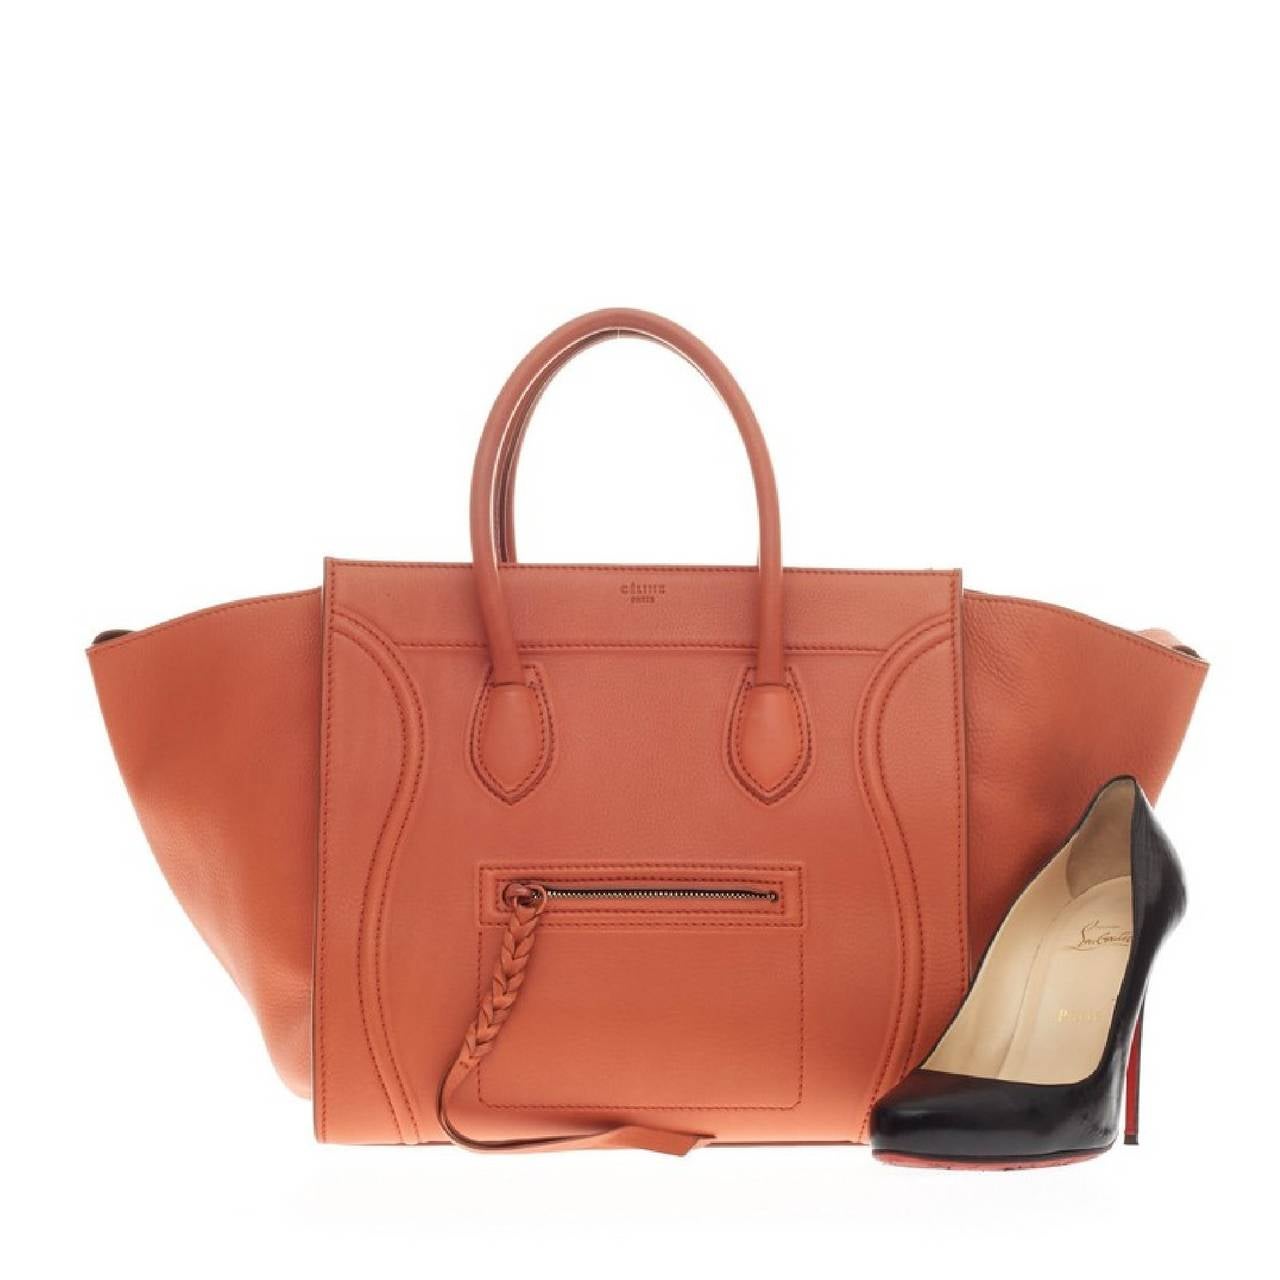 This authentic Celine Phantom Smooth Leather Medium is one of the most sought-after bags beloved by fashionistas. Crafted from vivid burnt orange smooth leather, this oversized minimalist tote features a braided zipper pull, dual-rolled handles, zip